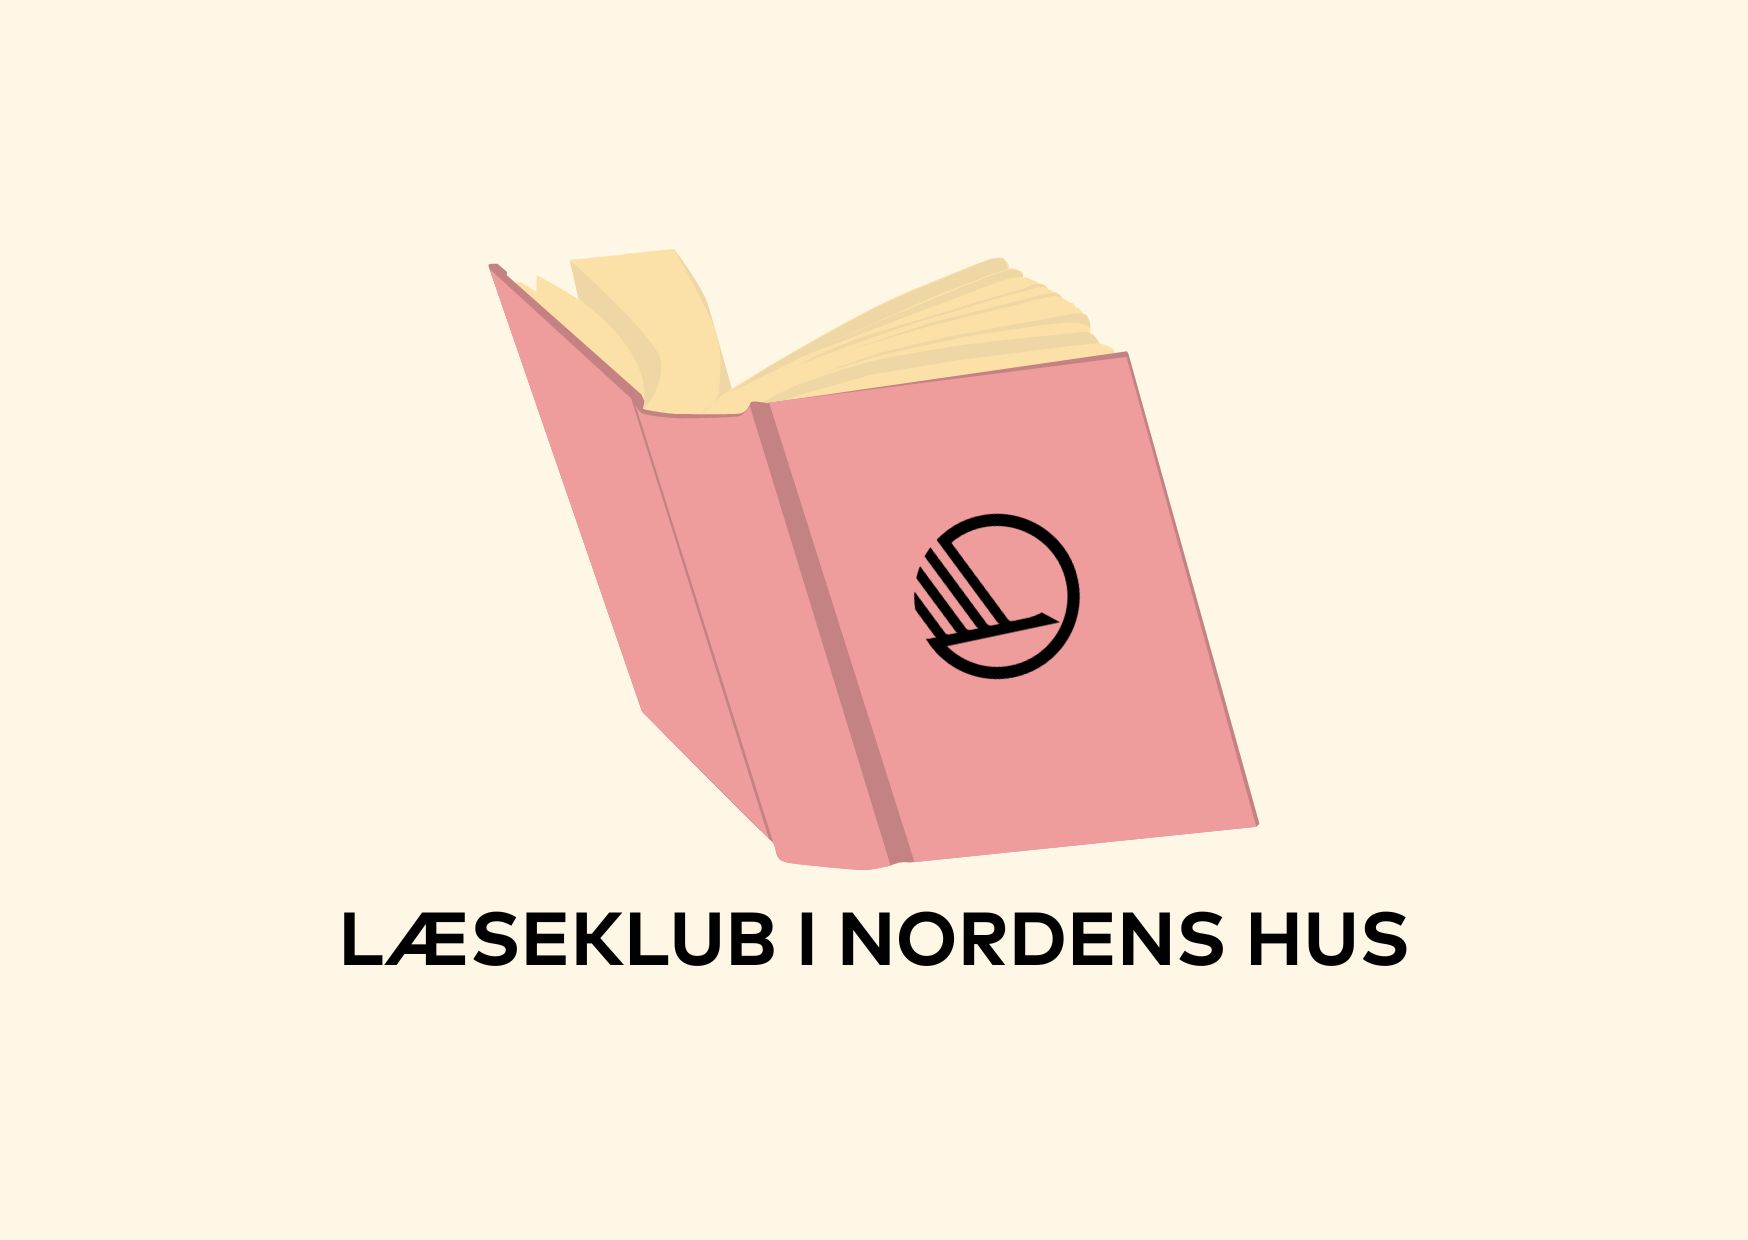 READING CLUB IN THE NORDIC HOUSE